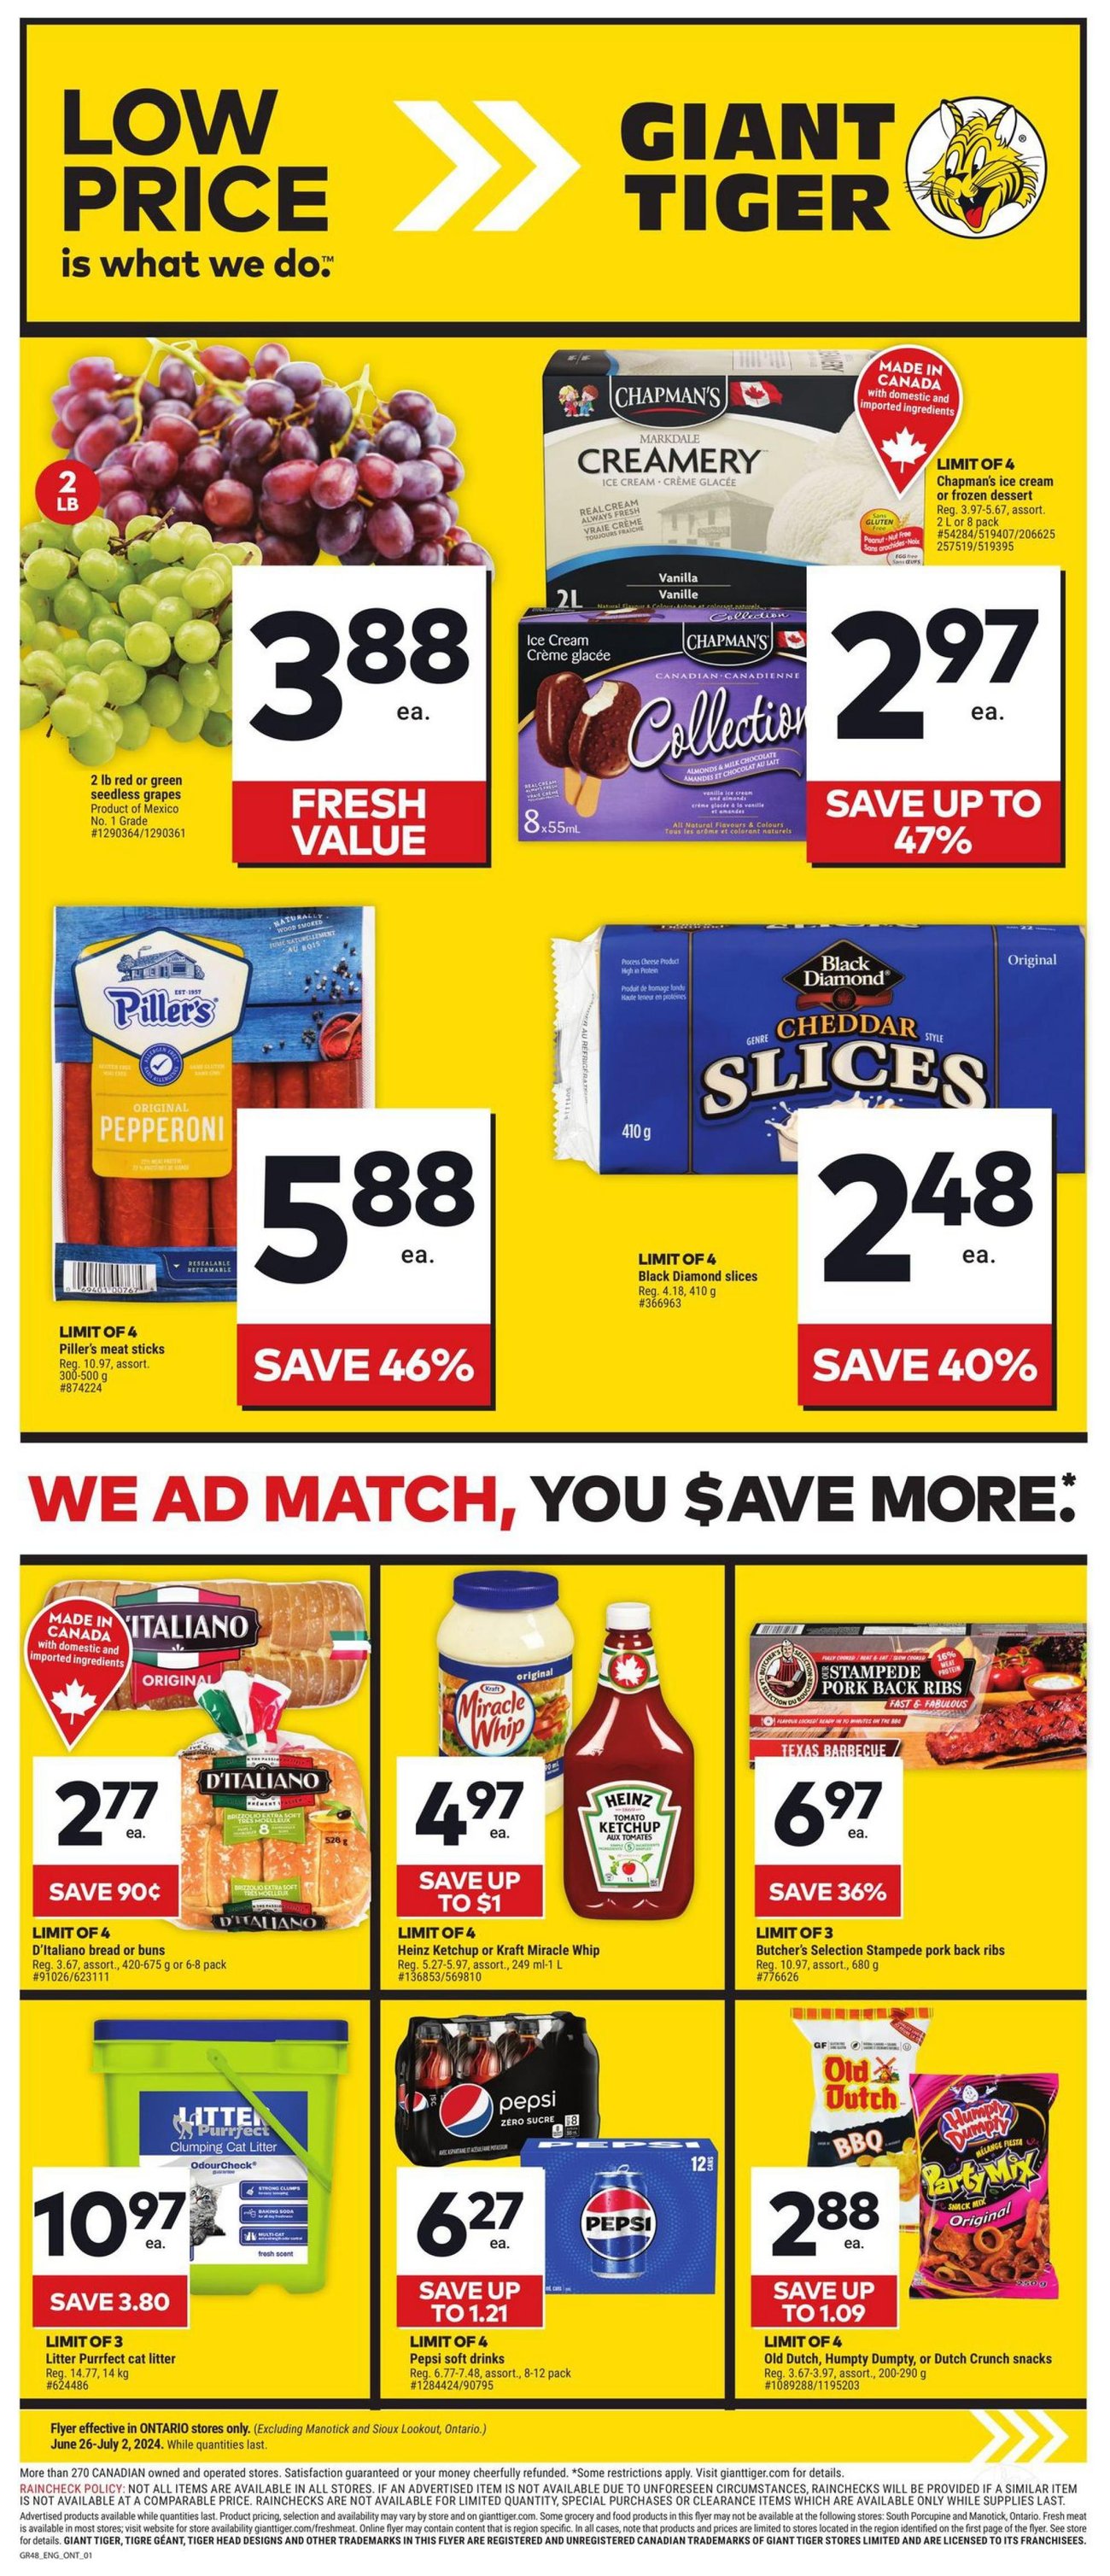 Giant Tiger - Ontario - Weekly Flyer Specials - Page 1